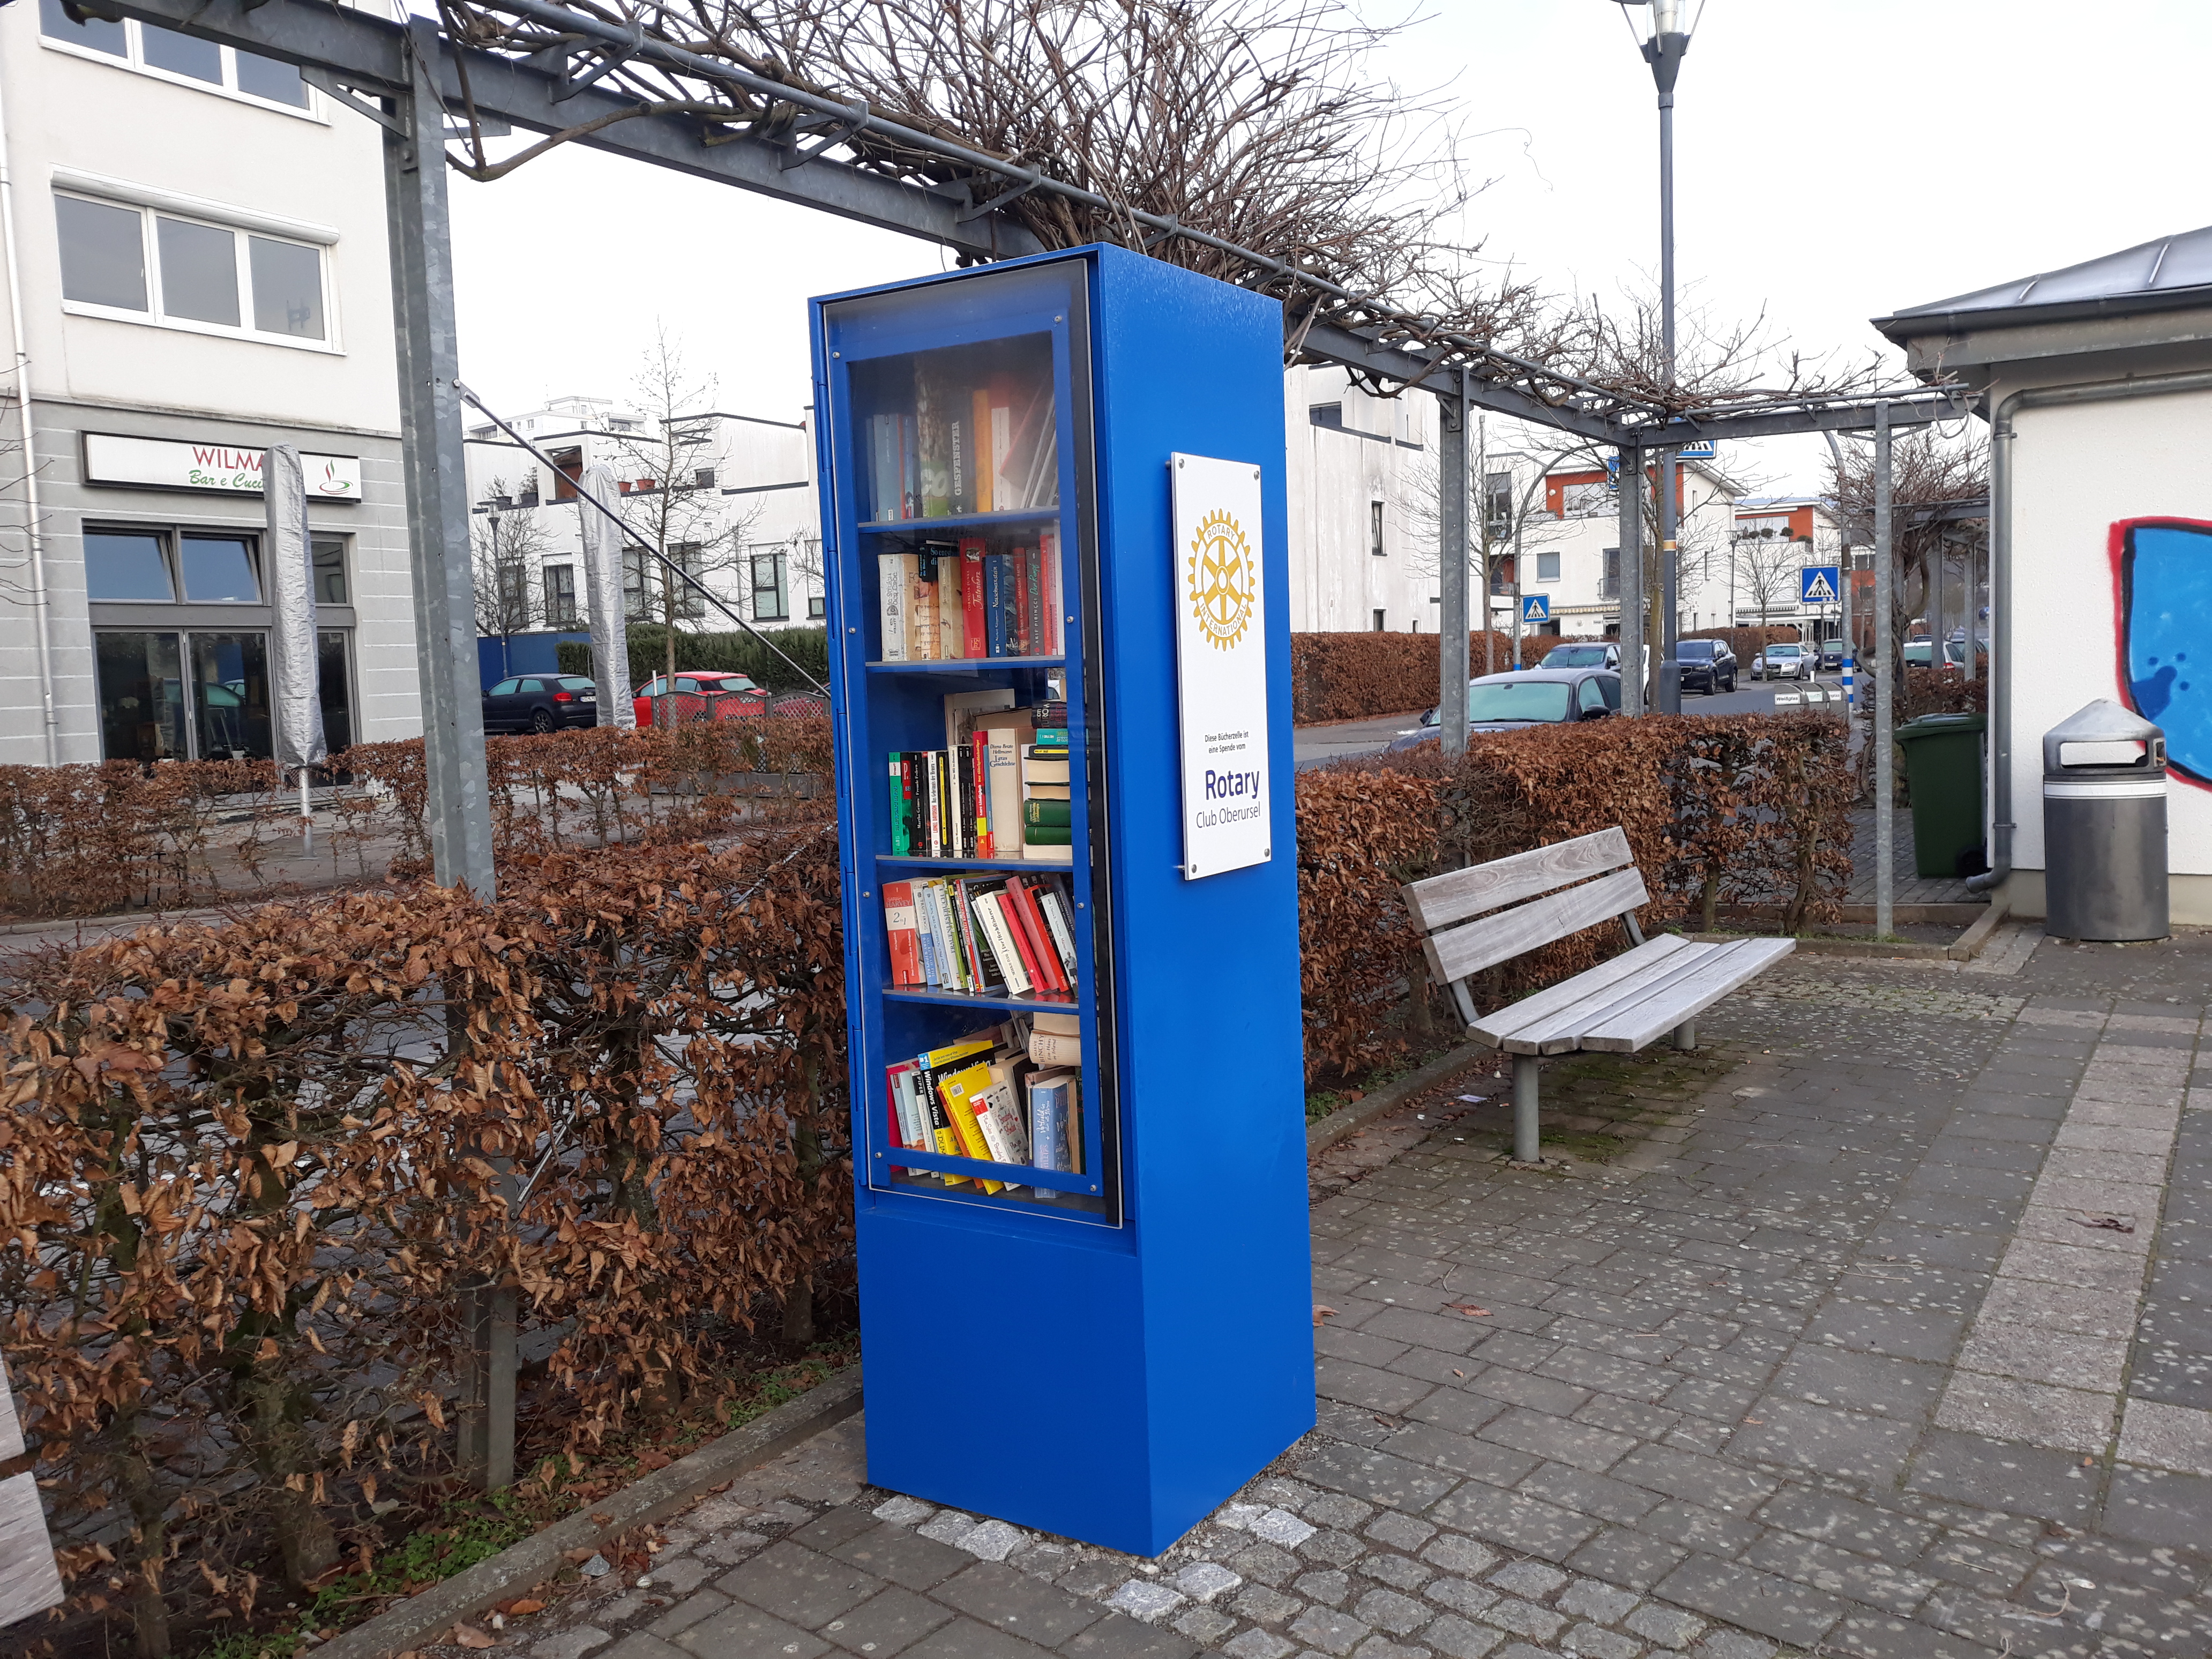 Book Swapping Cabinet In Camp King Allthingsgerman Net Oberursel